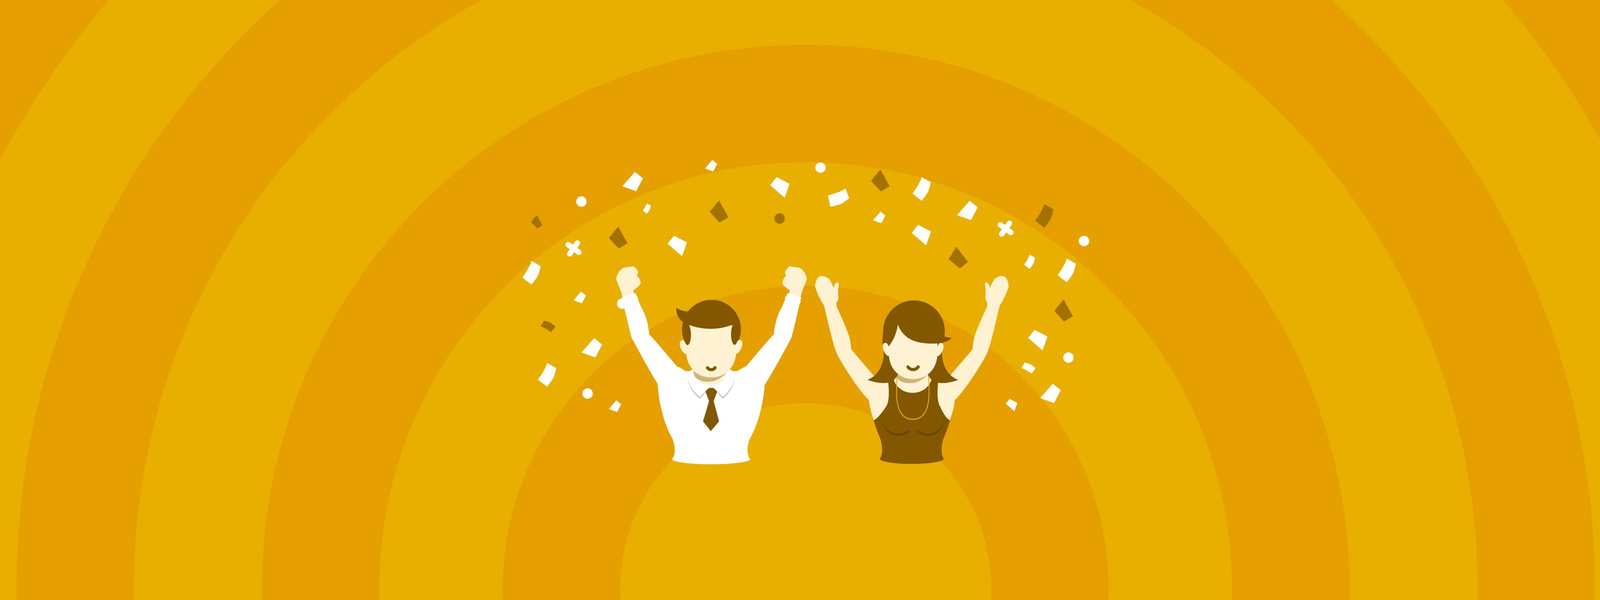 Two people celebrating with their hands up.